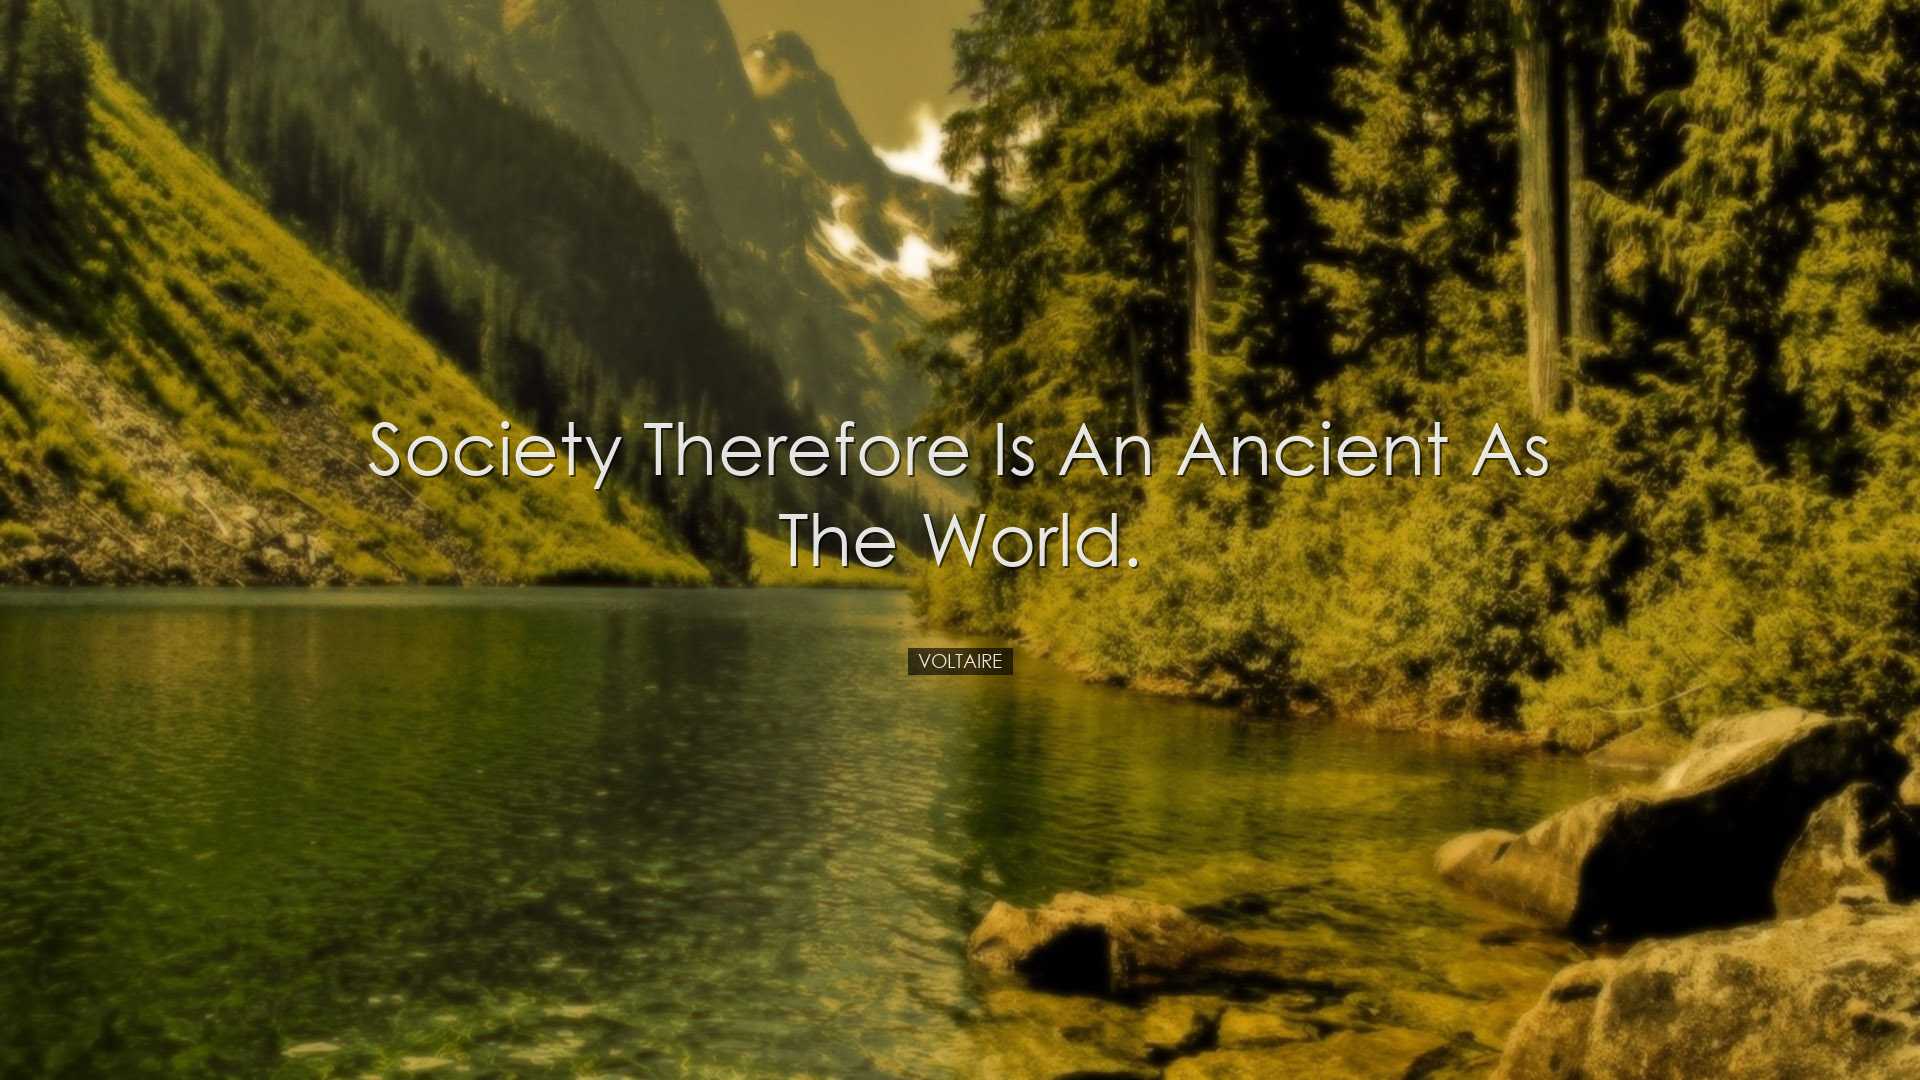 Society therefore is an ancient as the world. - Voltaire